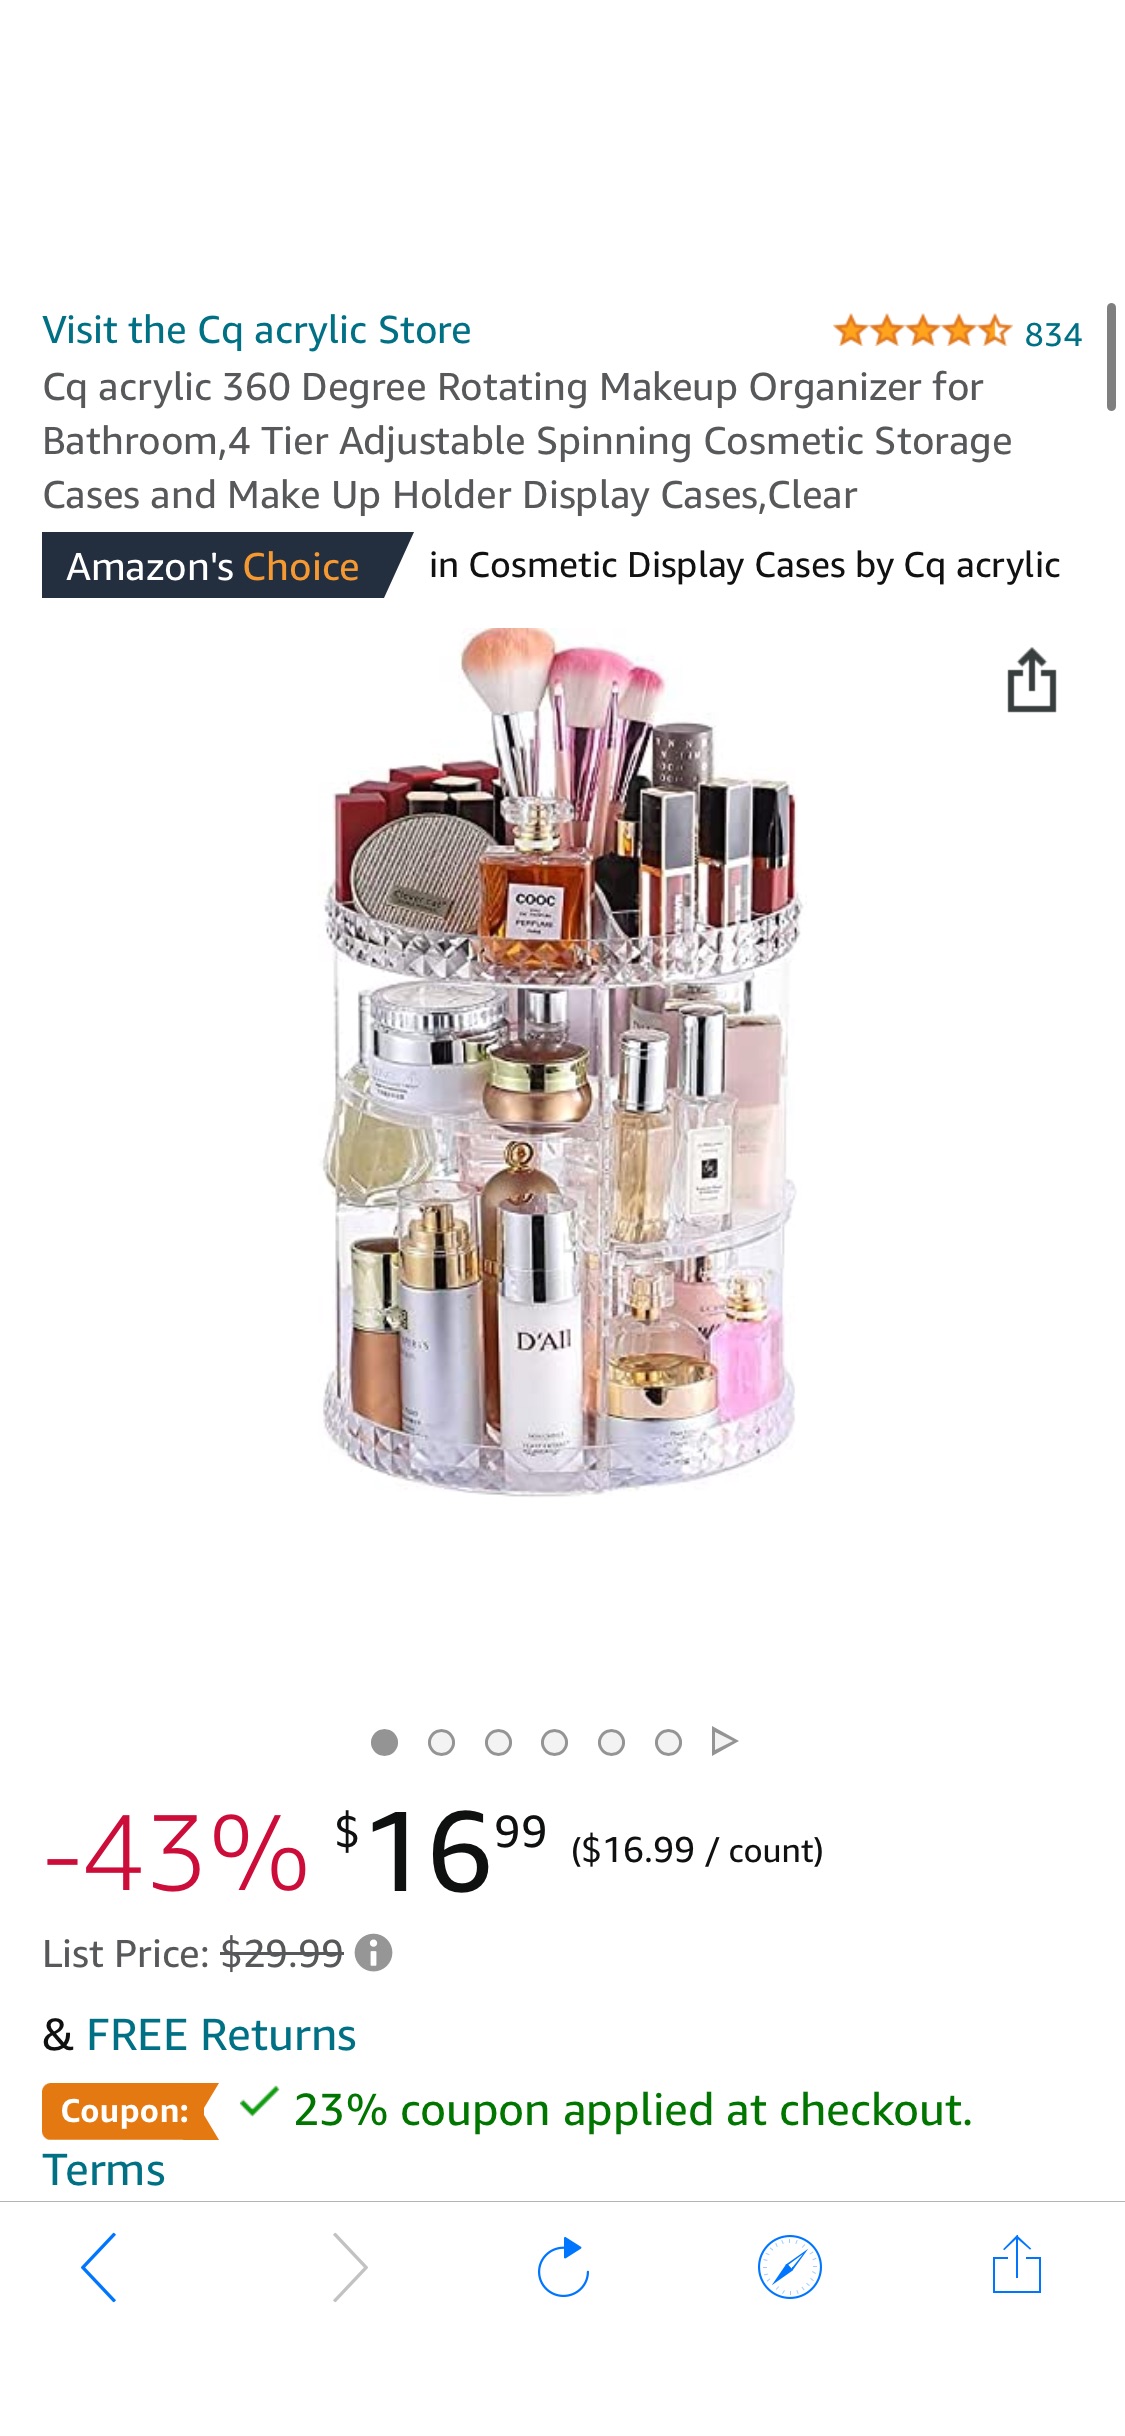 Amazon.com: Cq acrylic 360 Degree Rotating Makeup Organizer for Bathroom,4 Tier Adjustable Spinning Cosmetic Storage Cases and Make Up Holder Display Cases,Clear :护肤品收纳架